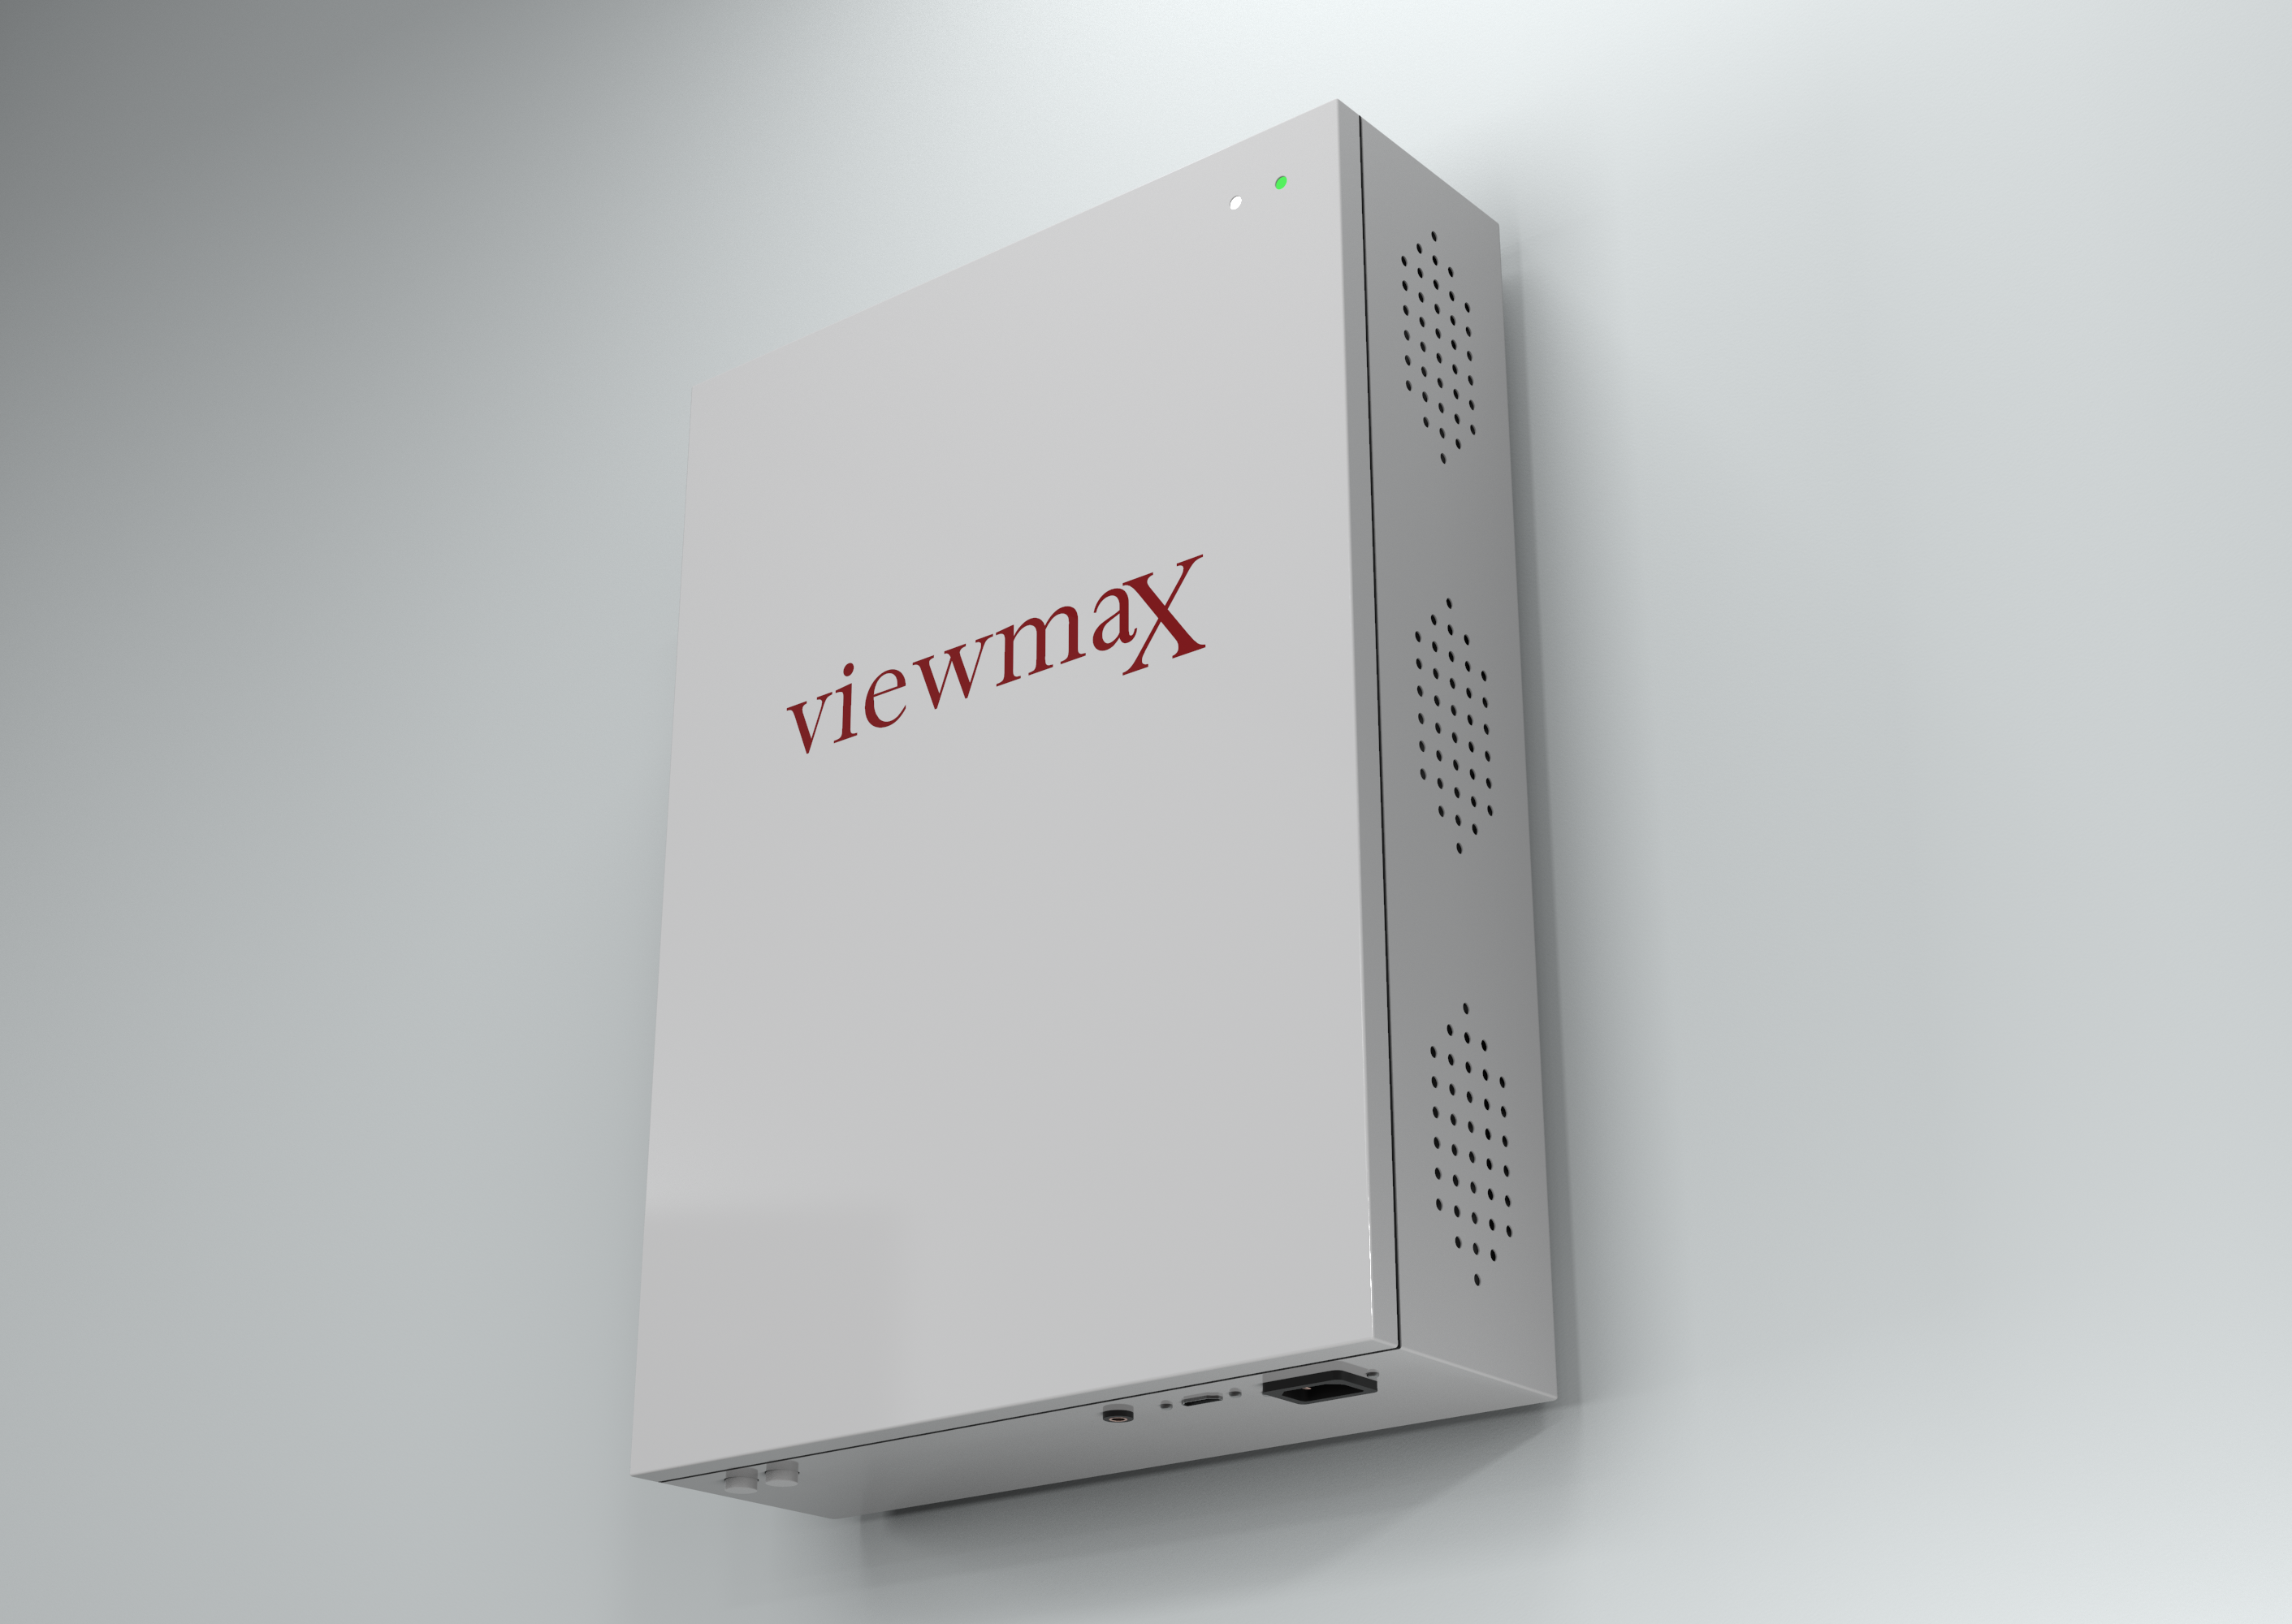 viewmax system - Viewmax Green Cinemas Network: Empowering Film Distributors to Reach New Heights in Nigeria's Film Industry